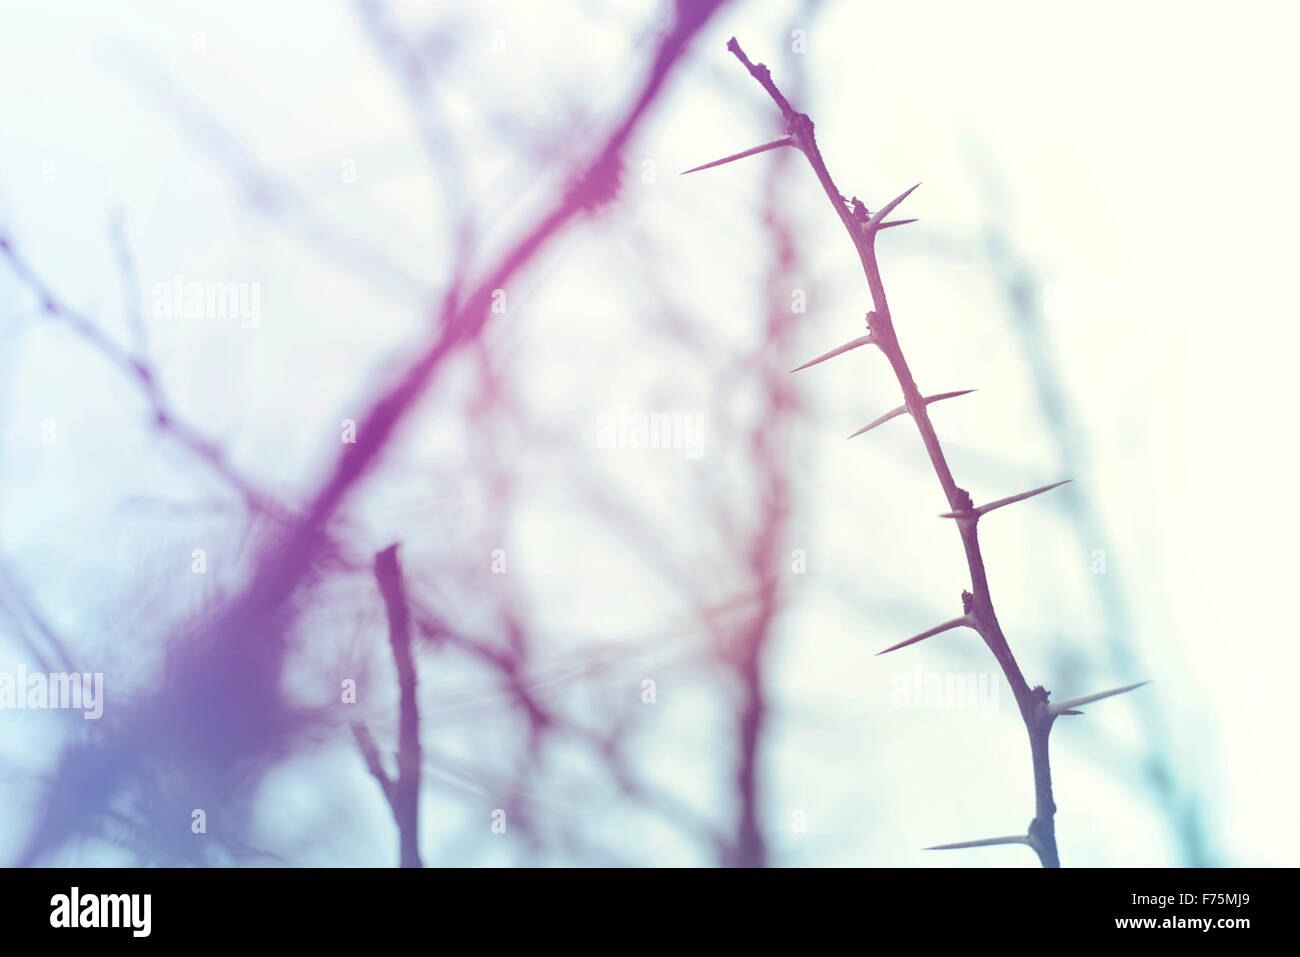 Closeup of winter thorn branch in the wilderness with vintage hipster filter and blur background. Stock Photo